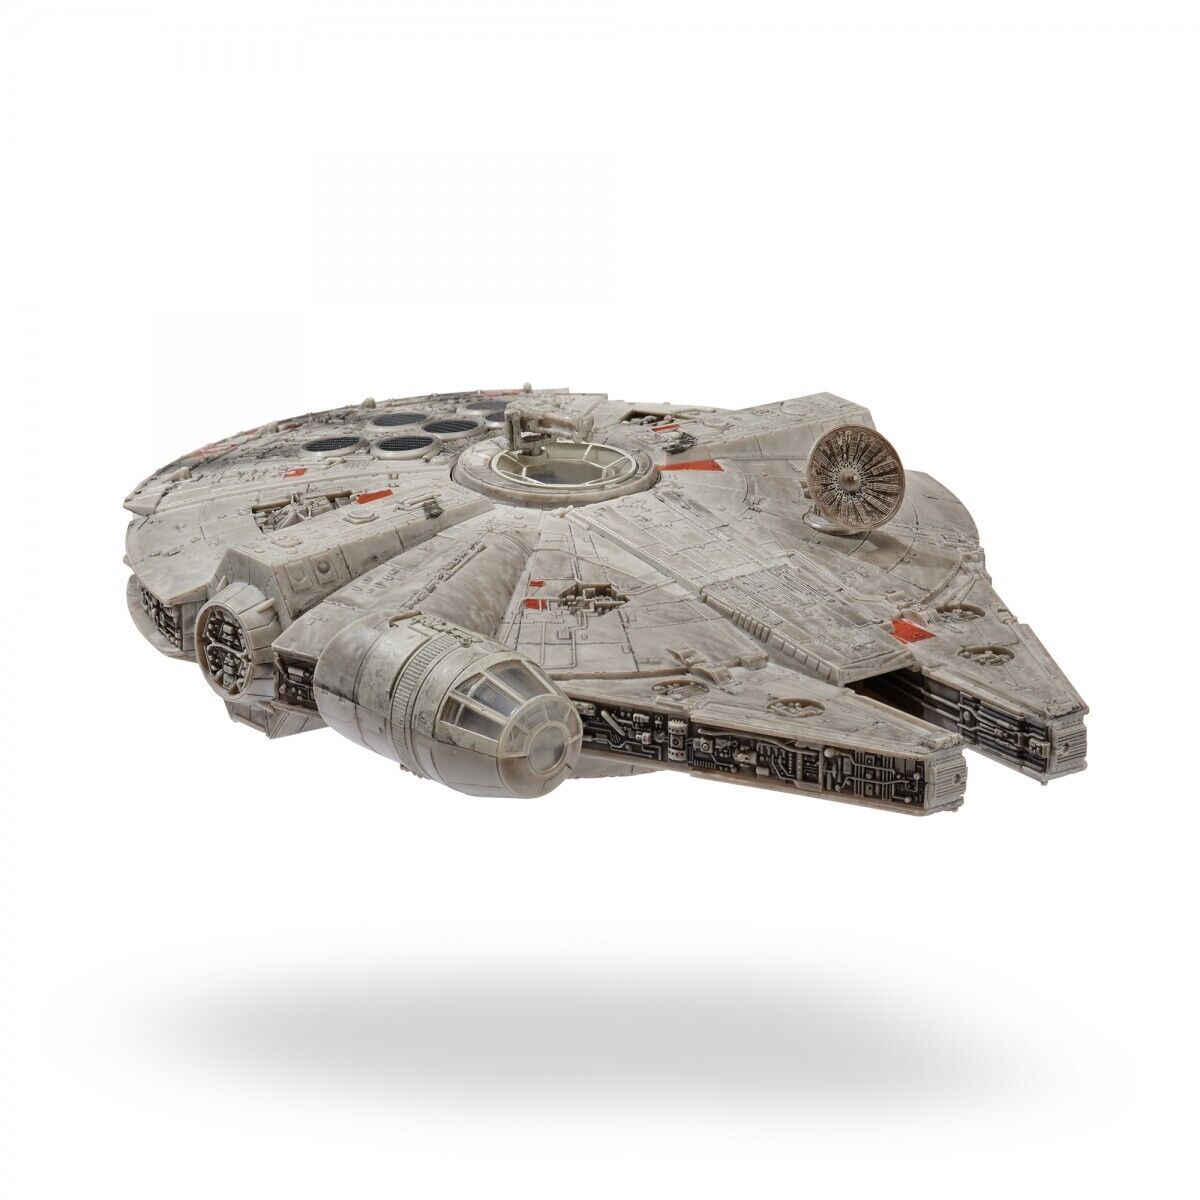 NEW Star Wars Micro Galaxy Squadron MILLENNIUM FALCON - Feature-packed